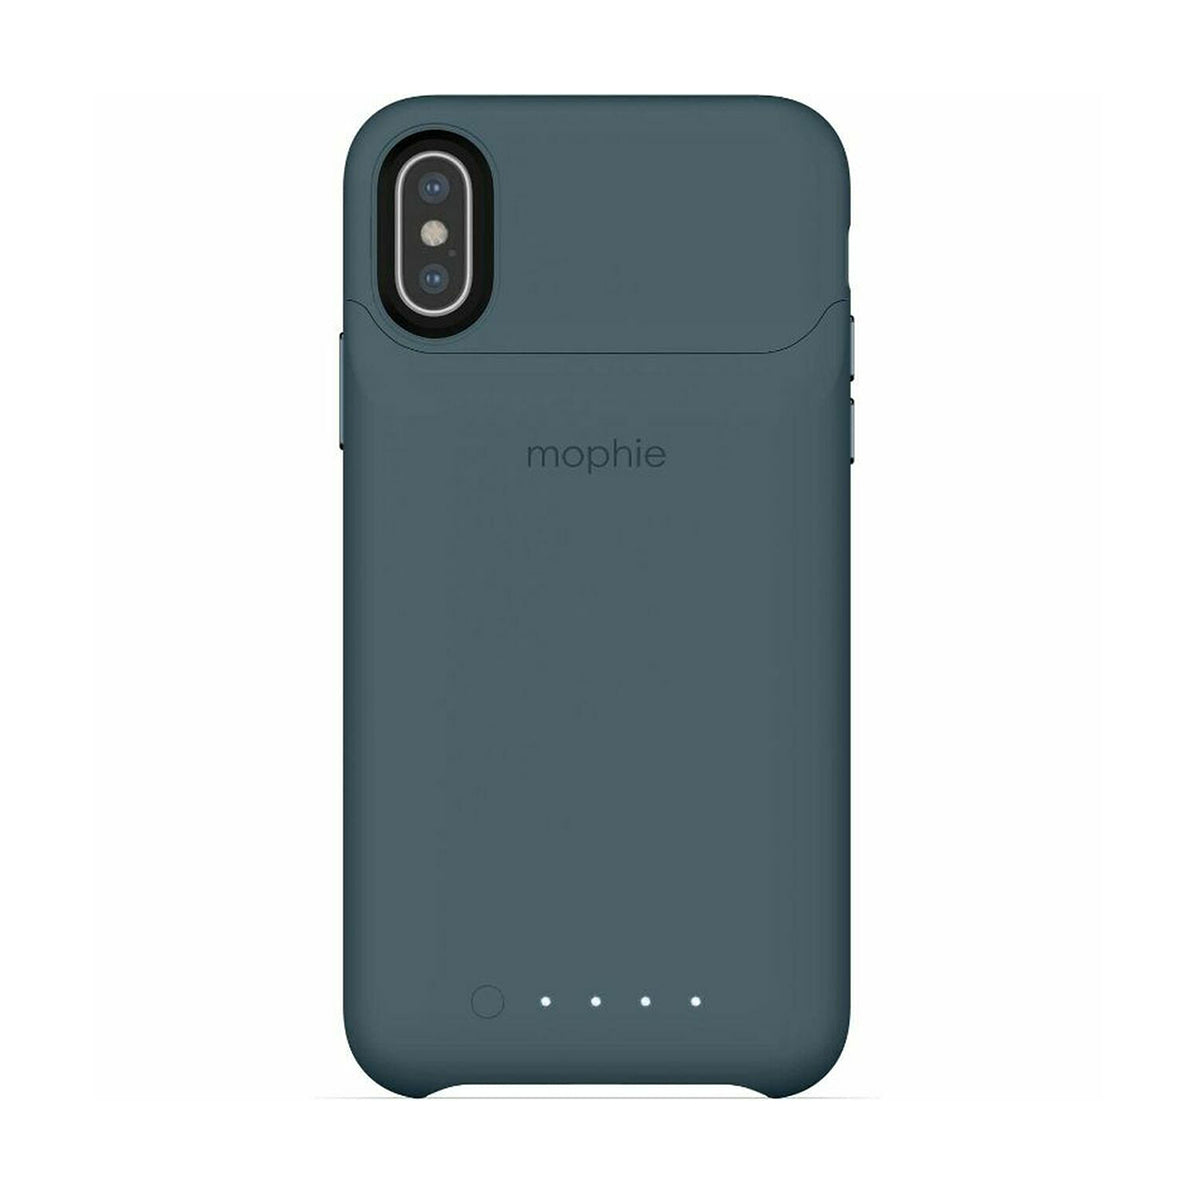 Mophie Juice Pack Access para iPhone XS Max Funda con batería inalámbrica - mophie Juice Pack Access for iPhone XS Max Case with Wireless Battery